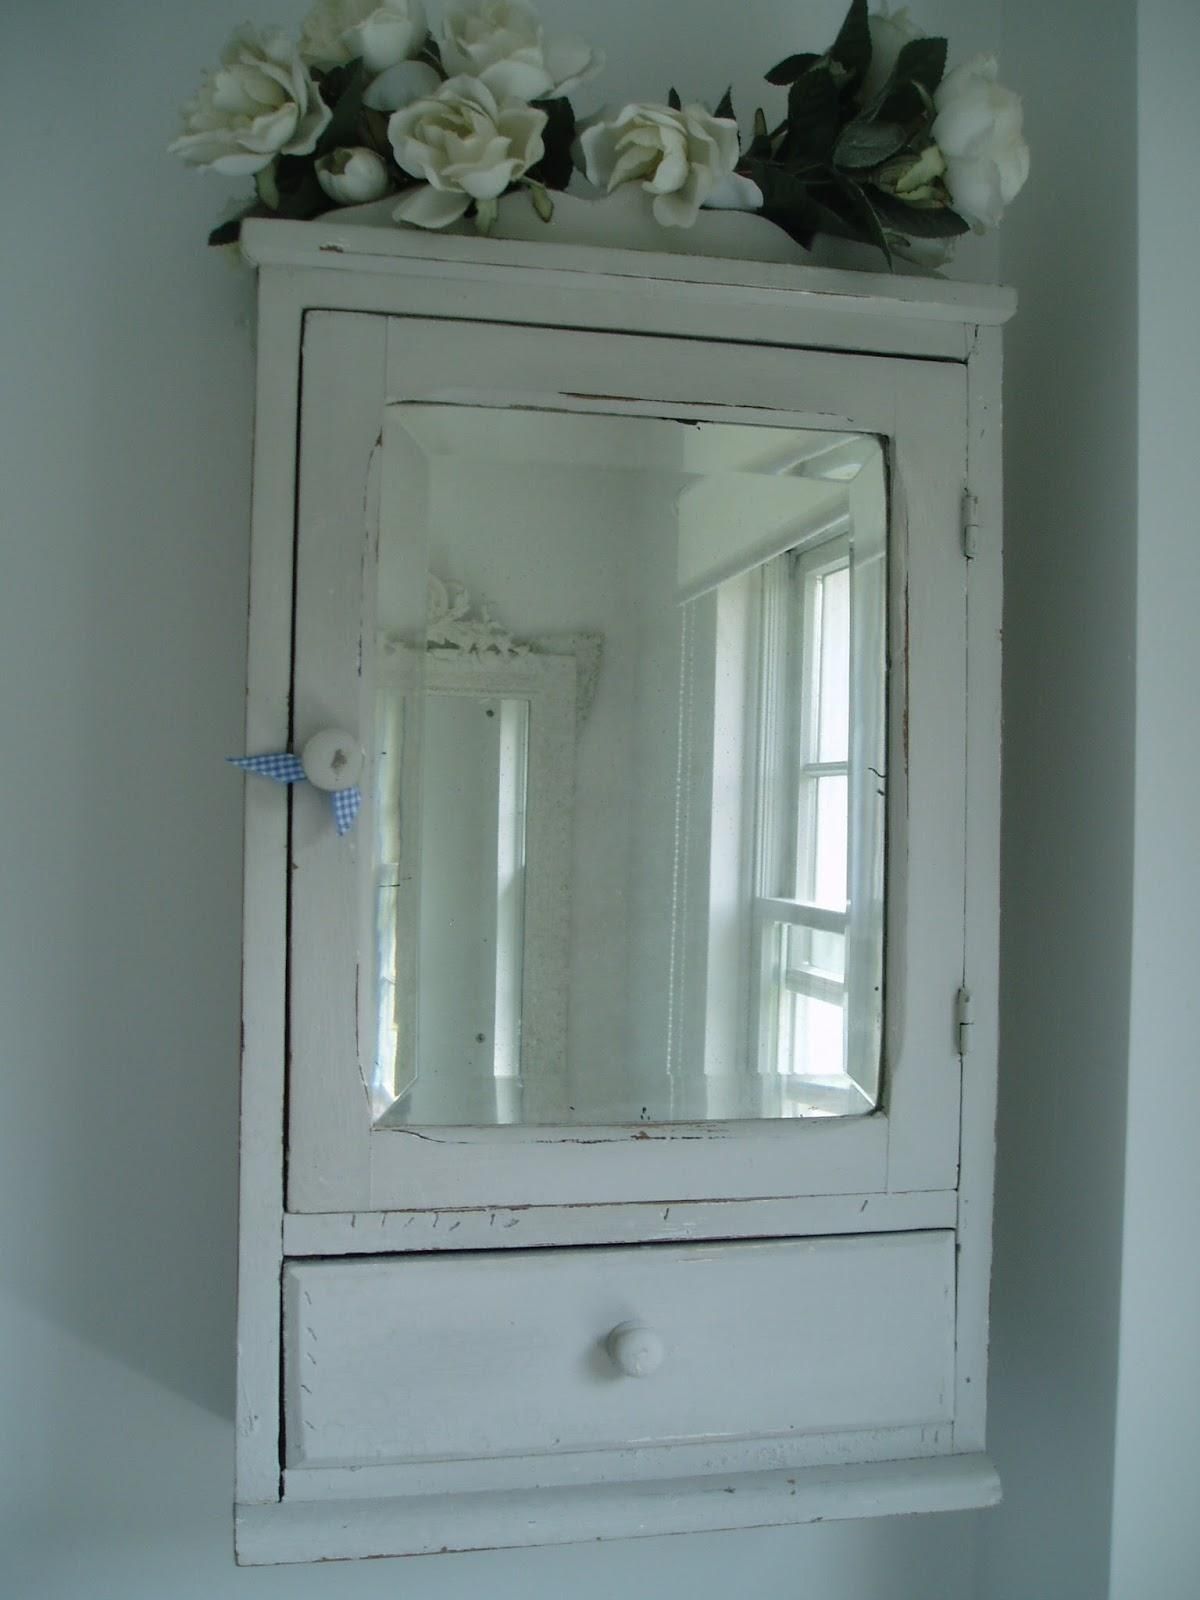 Tremendous Old Fashioned Bathroom Mirrors Buy John Lewis Vintage Inside Bathroom Mirrors Vintage (View 6 of 20)